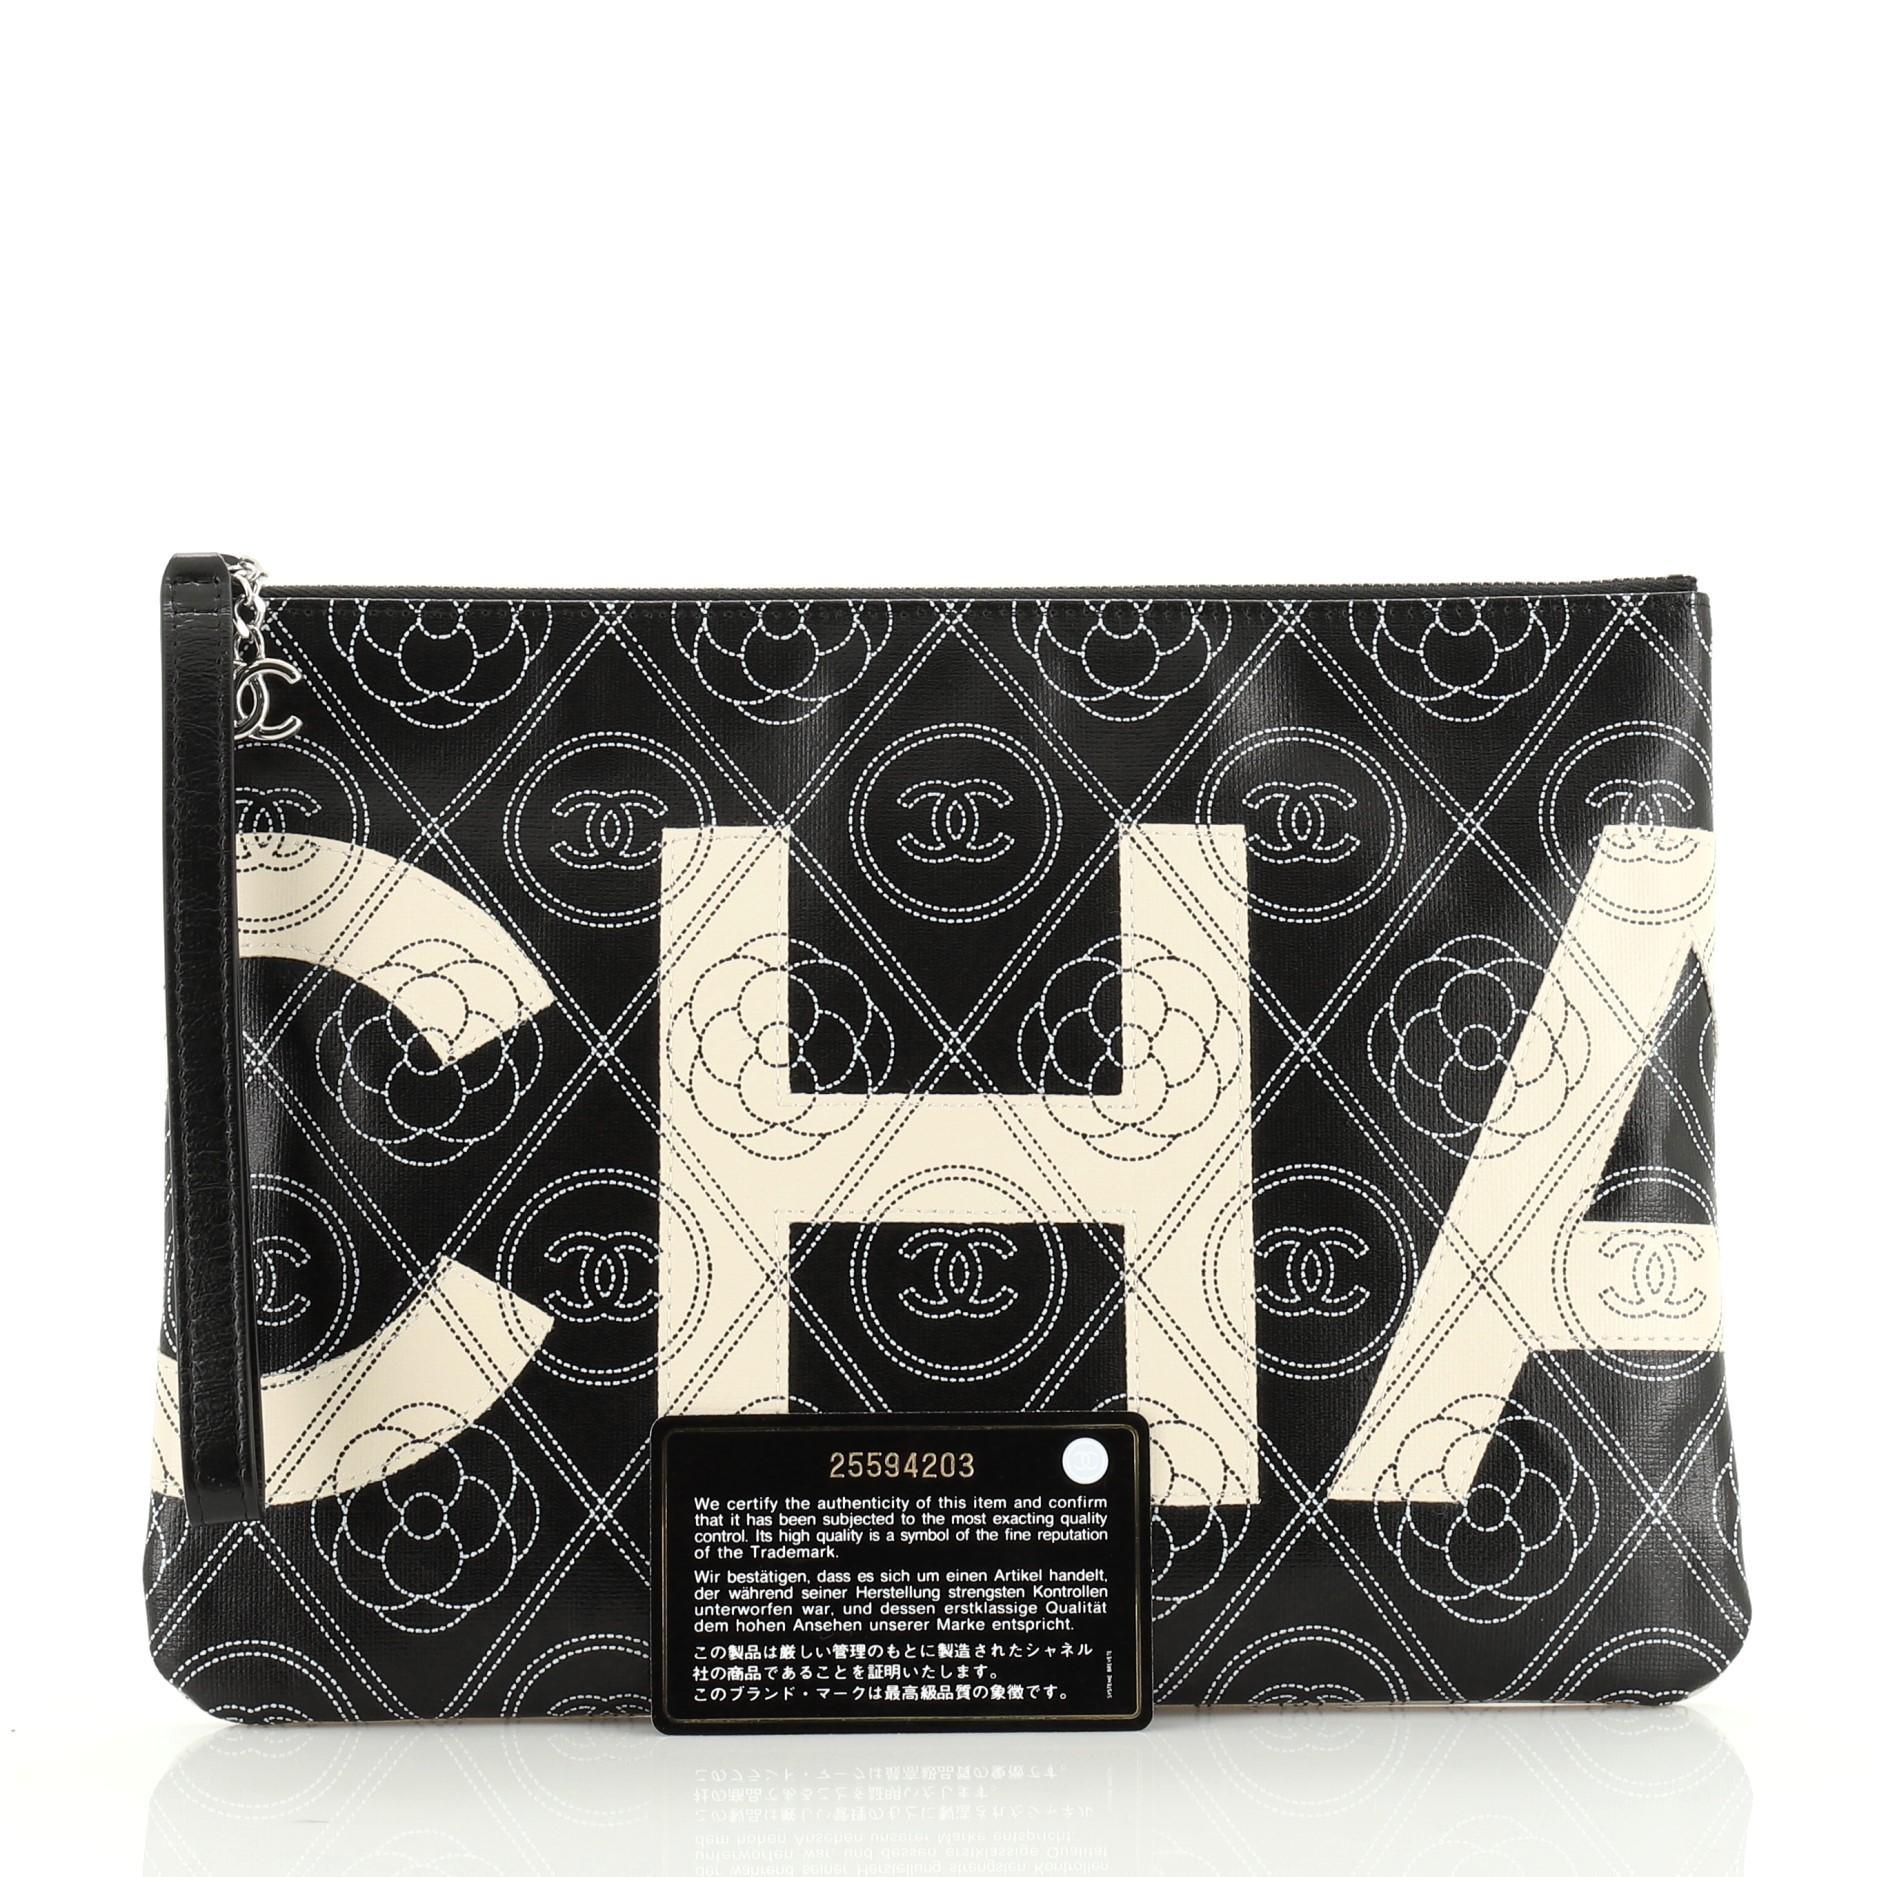 This Chanel Camellia Logo Wristlet Clutch Printed Coated Canvas Large, crafted from black and white printed coated canvas, features a wrist strap and silver-tone hardware. Its zip closure opens to a black fabric interior. Hologram sticker reads: